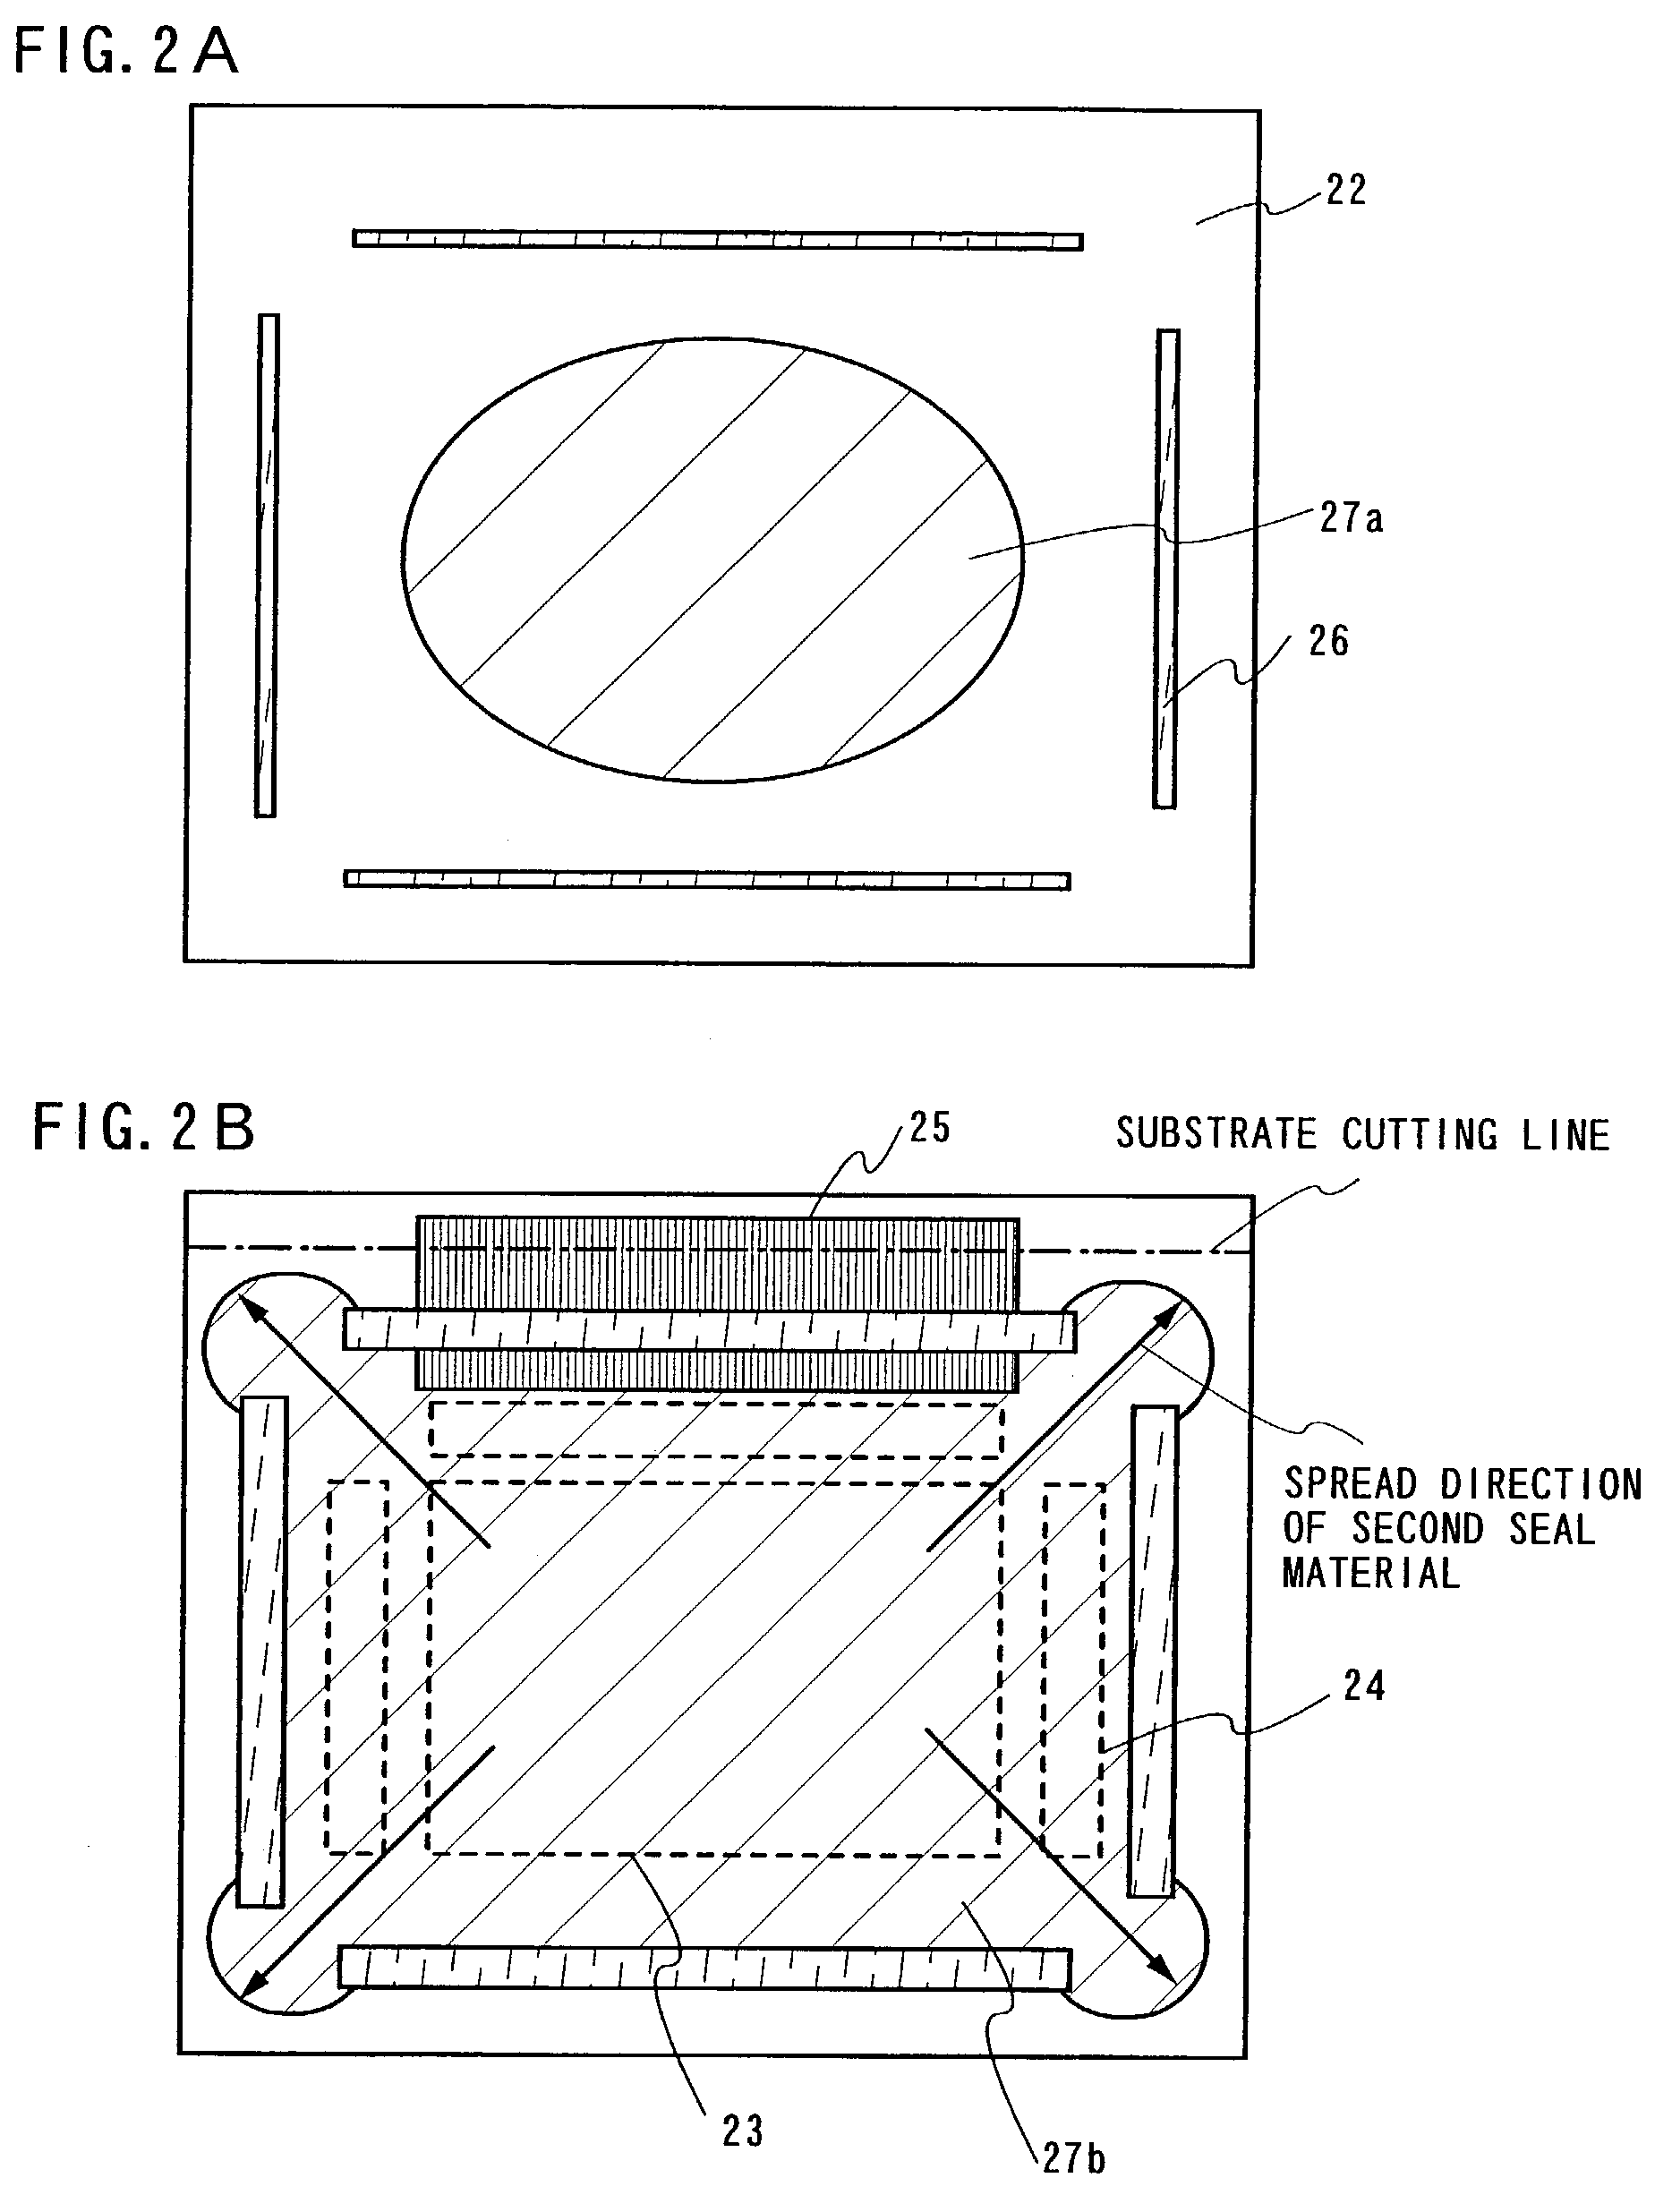 Light emitting device having pixel portion surrounded by first sealing material and covered with second sealing material